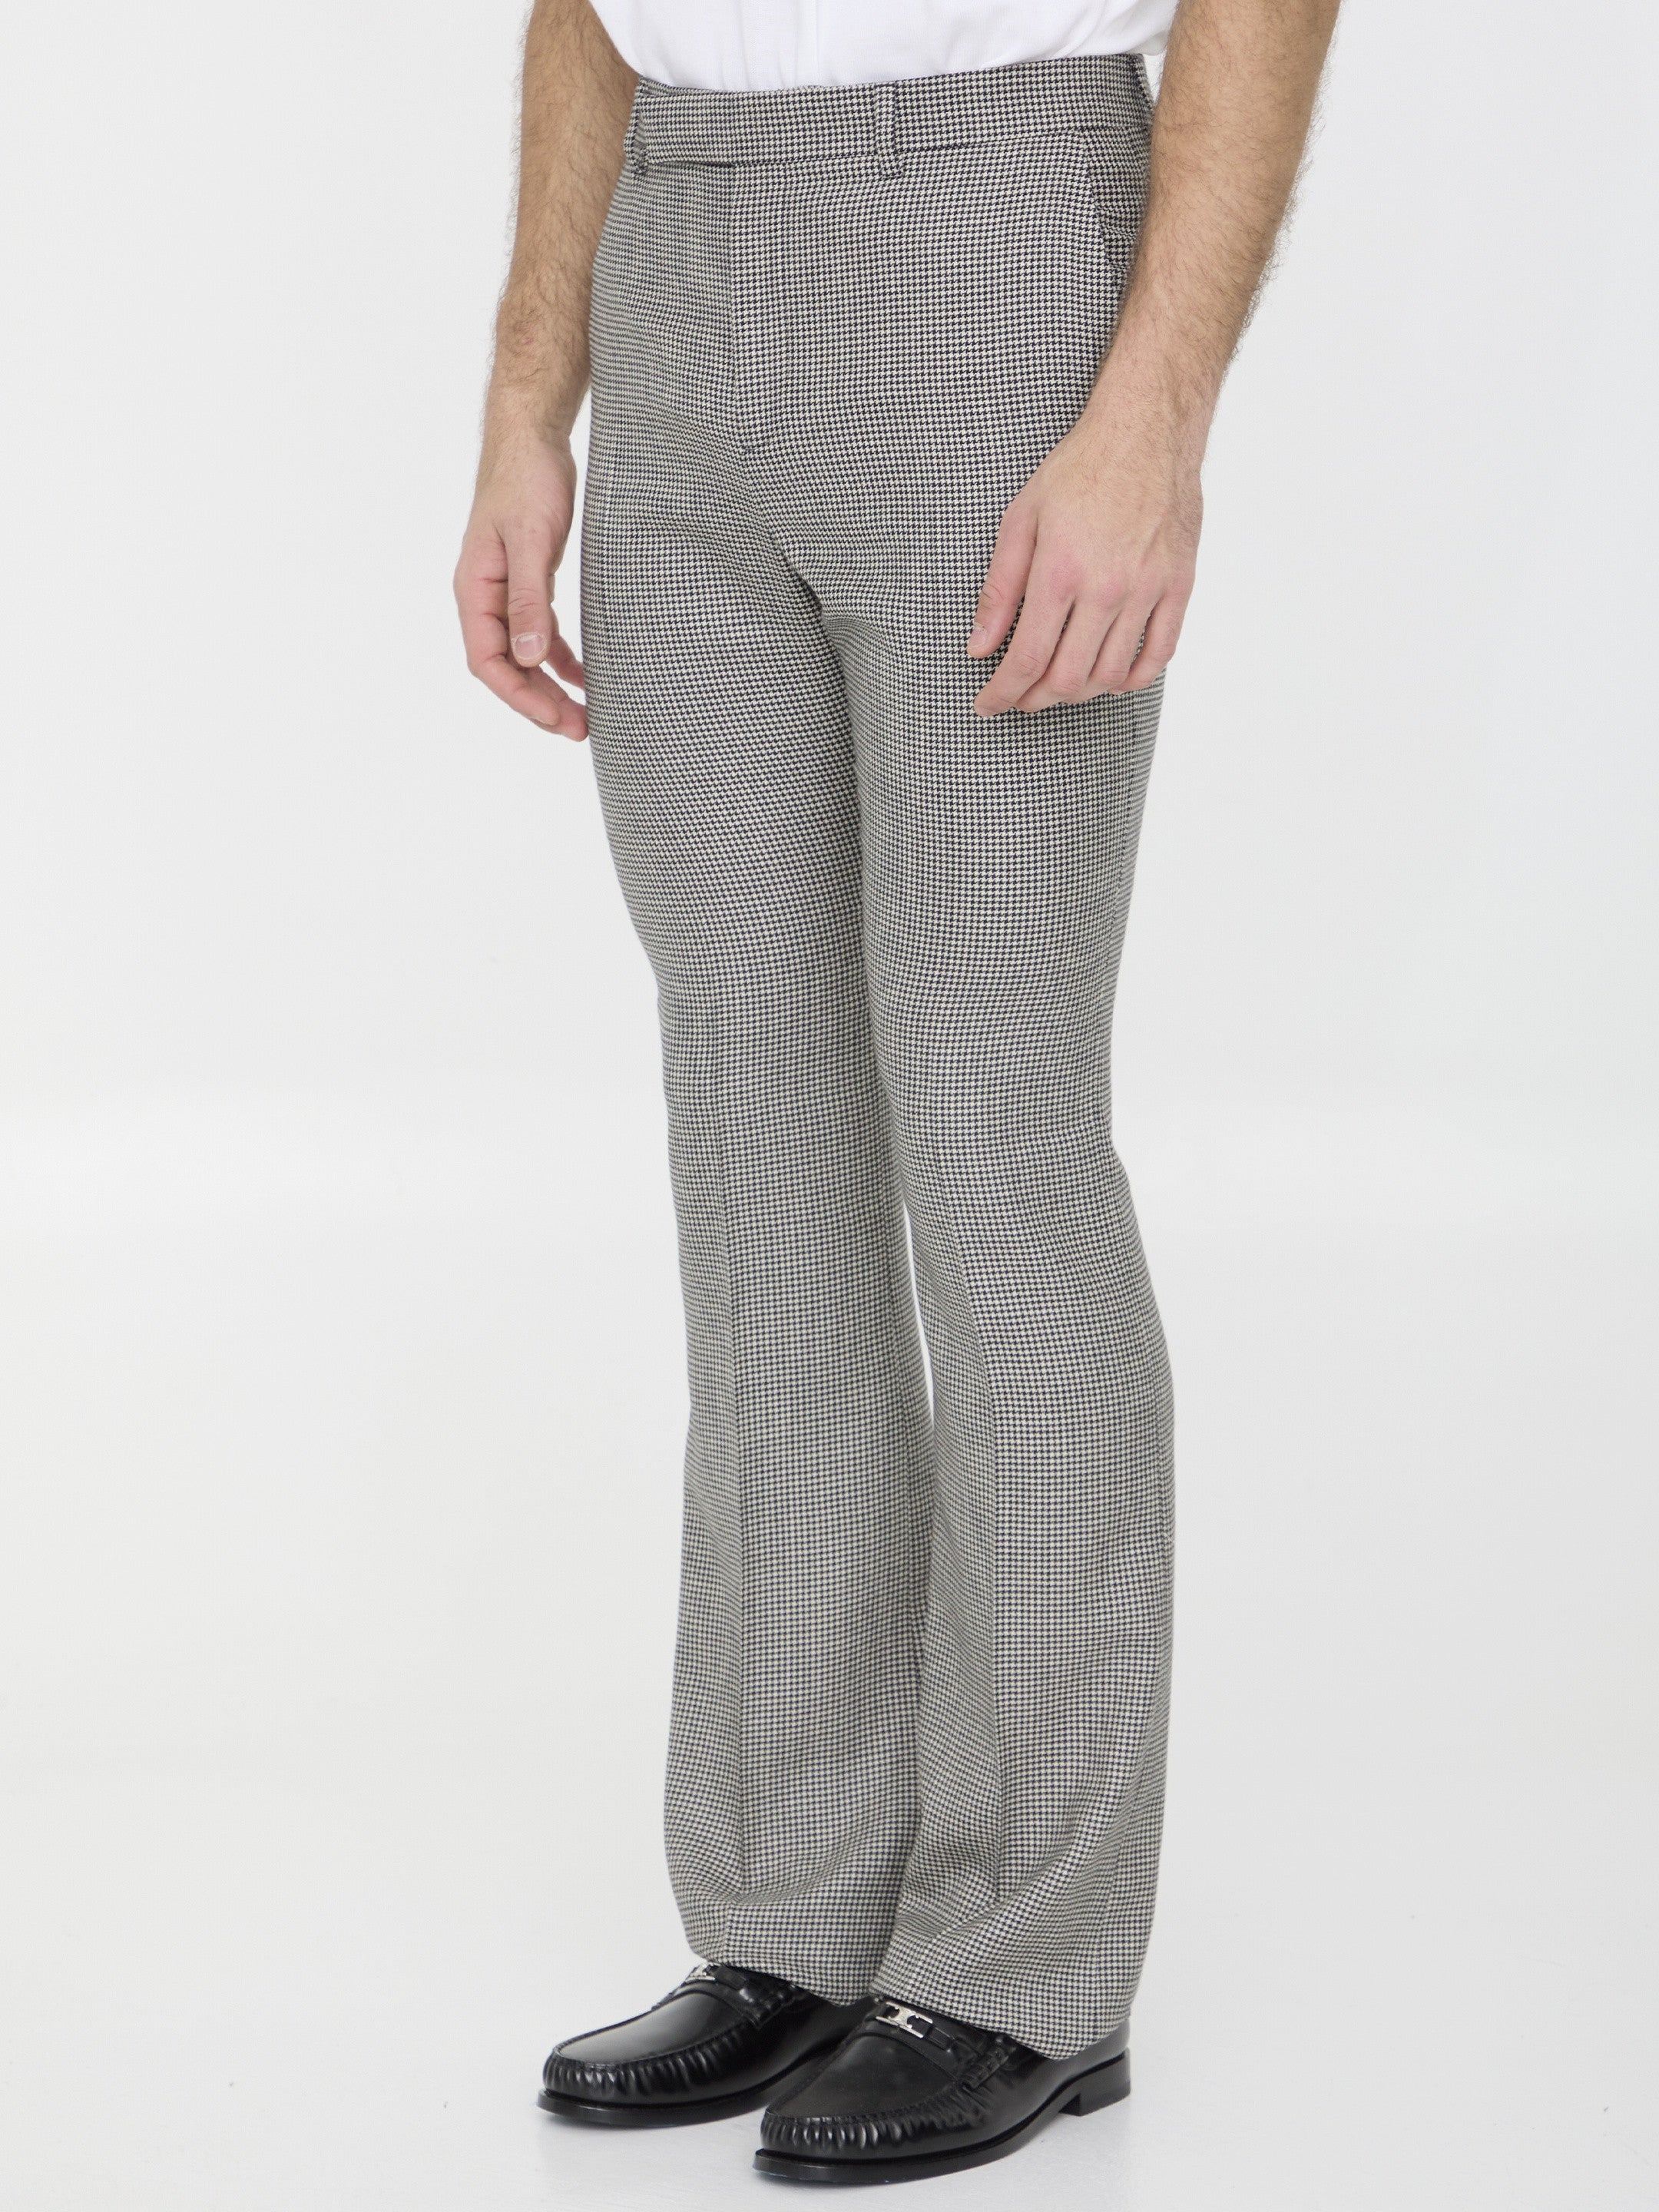 CELINE-OUTLET-SALE-Wool-and-cashmere-pants-Hosen-ARCHIVE-COLLECTION-2.jpg